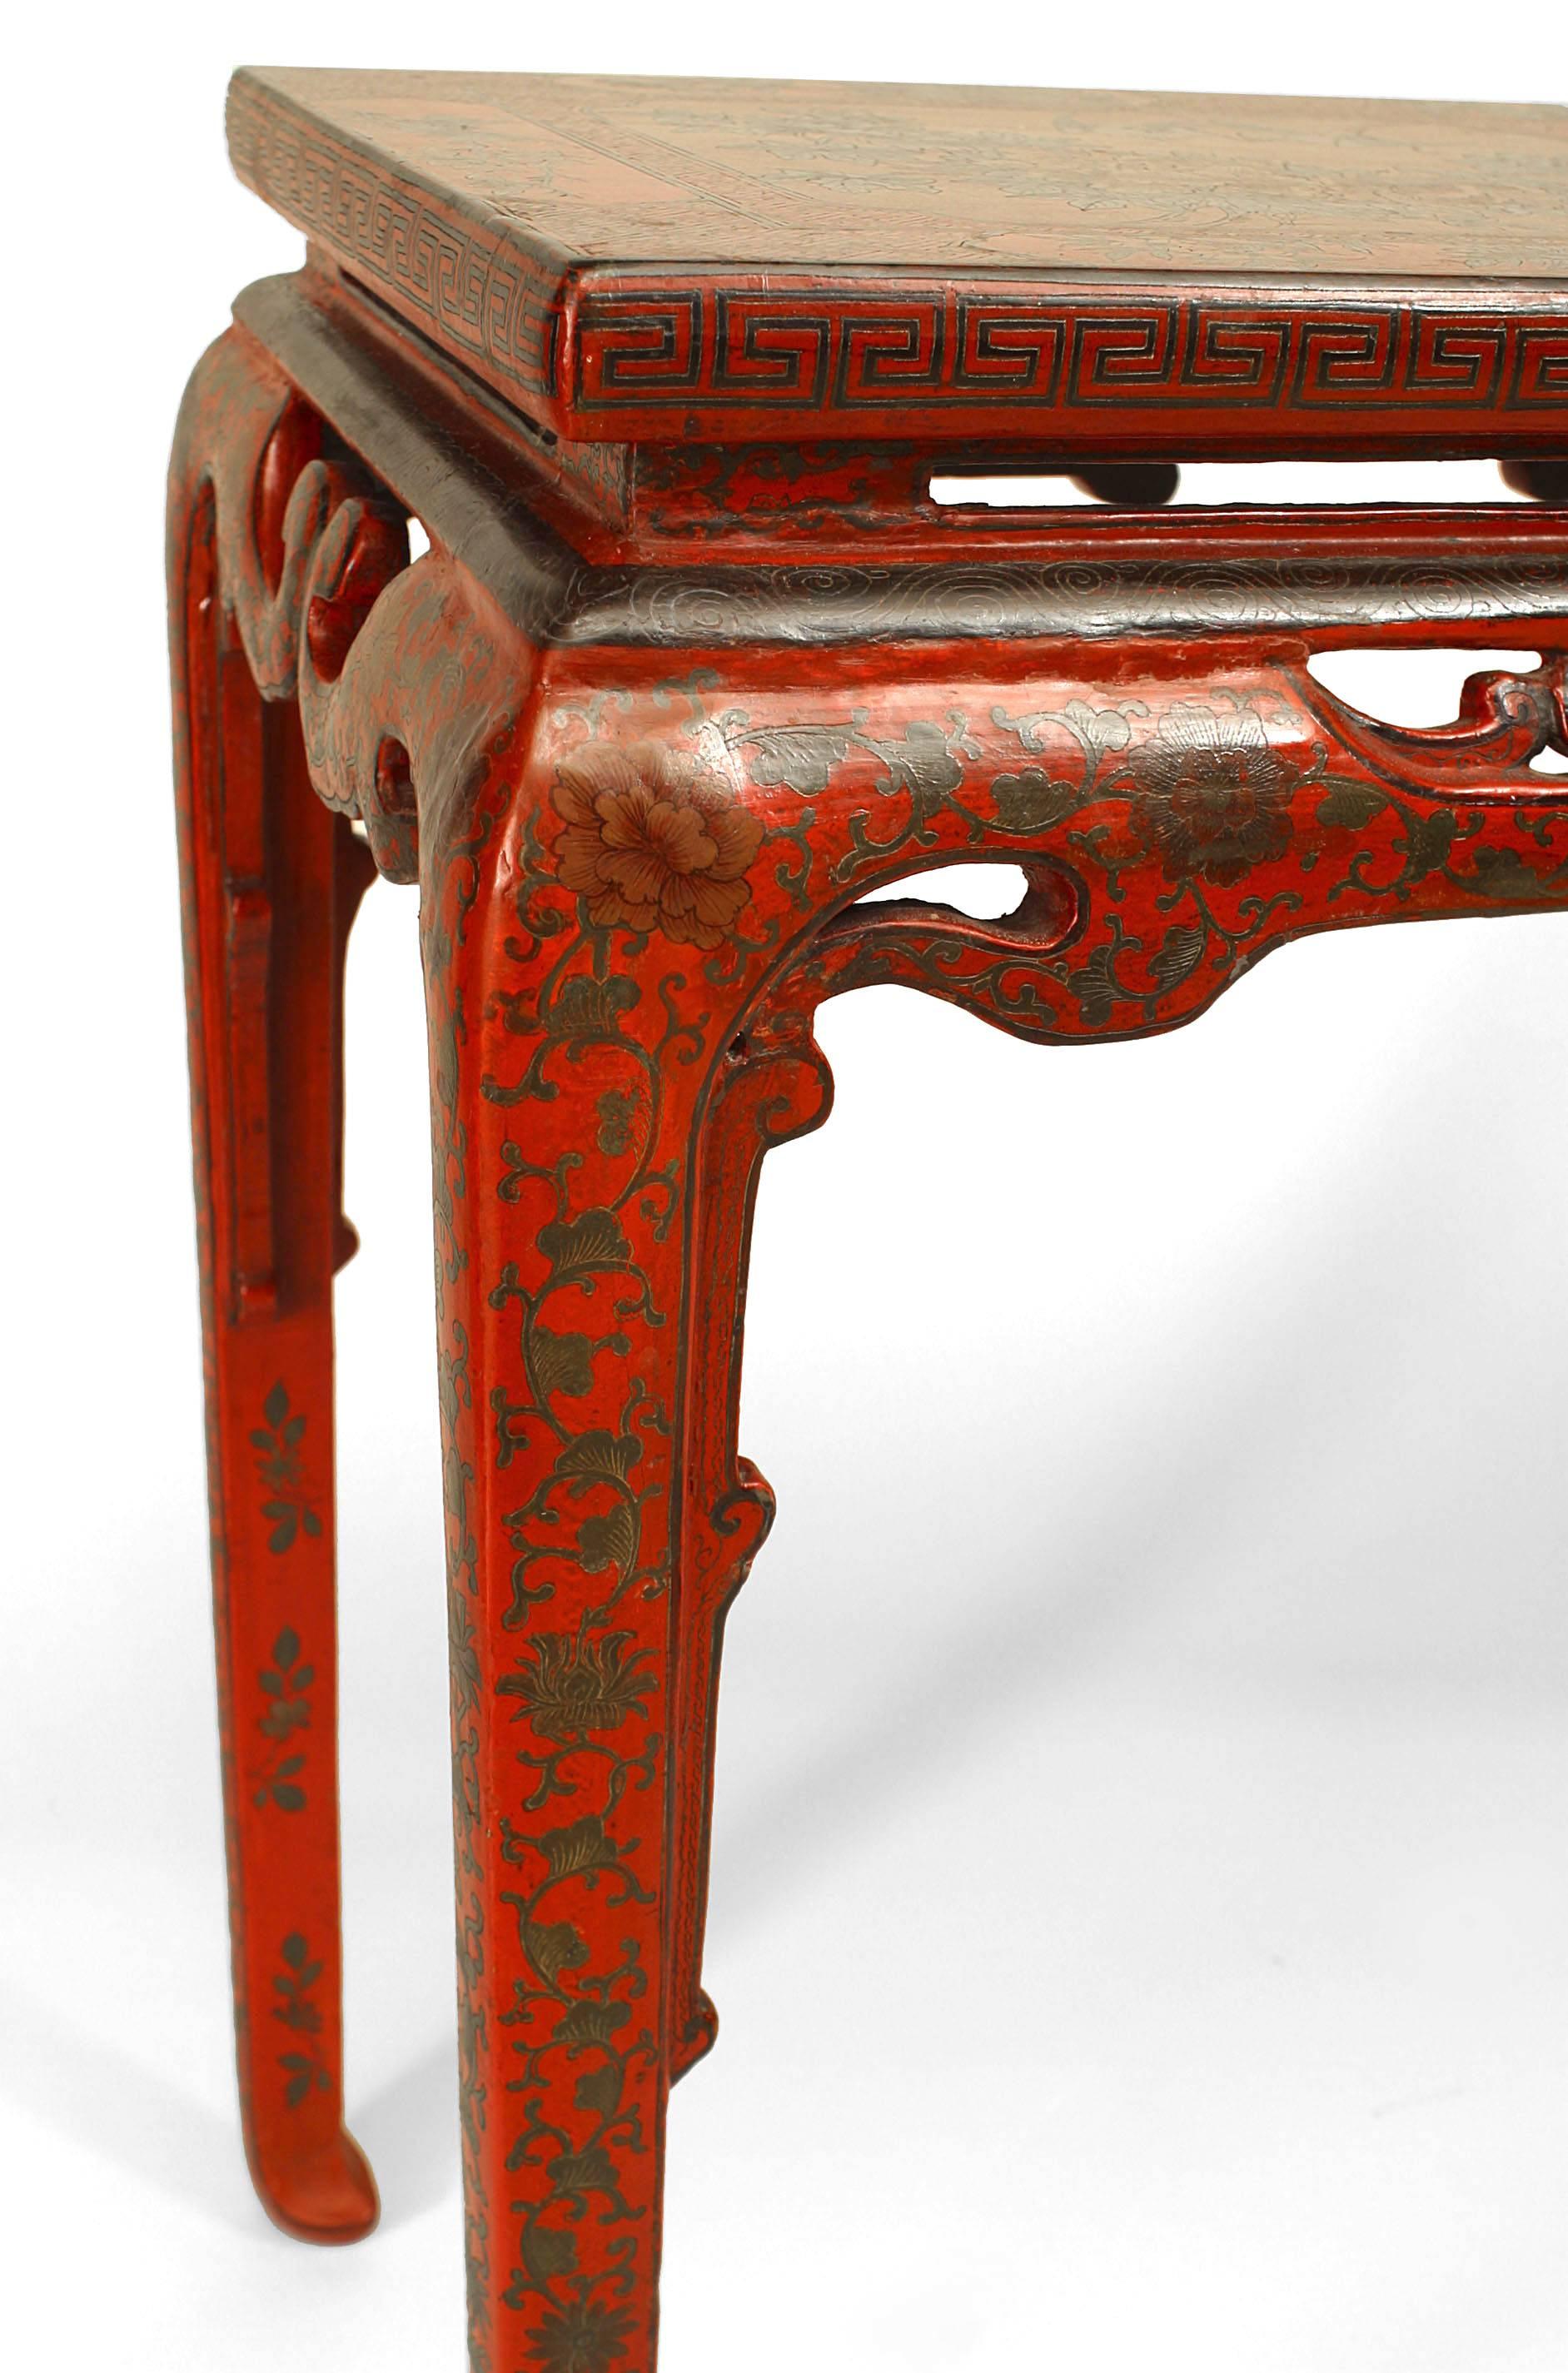 Wood Late 18th or Early 19th c. Red Chinese Lacquer Console Table